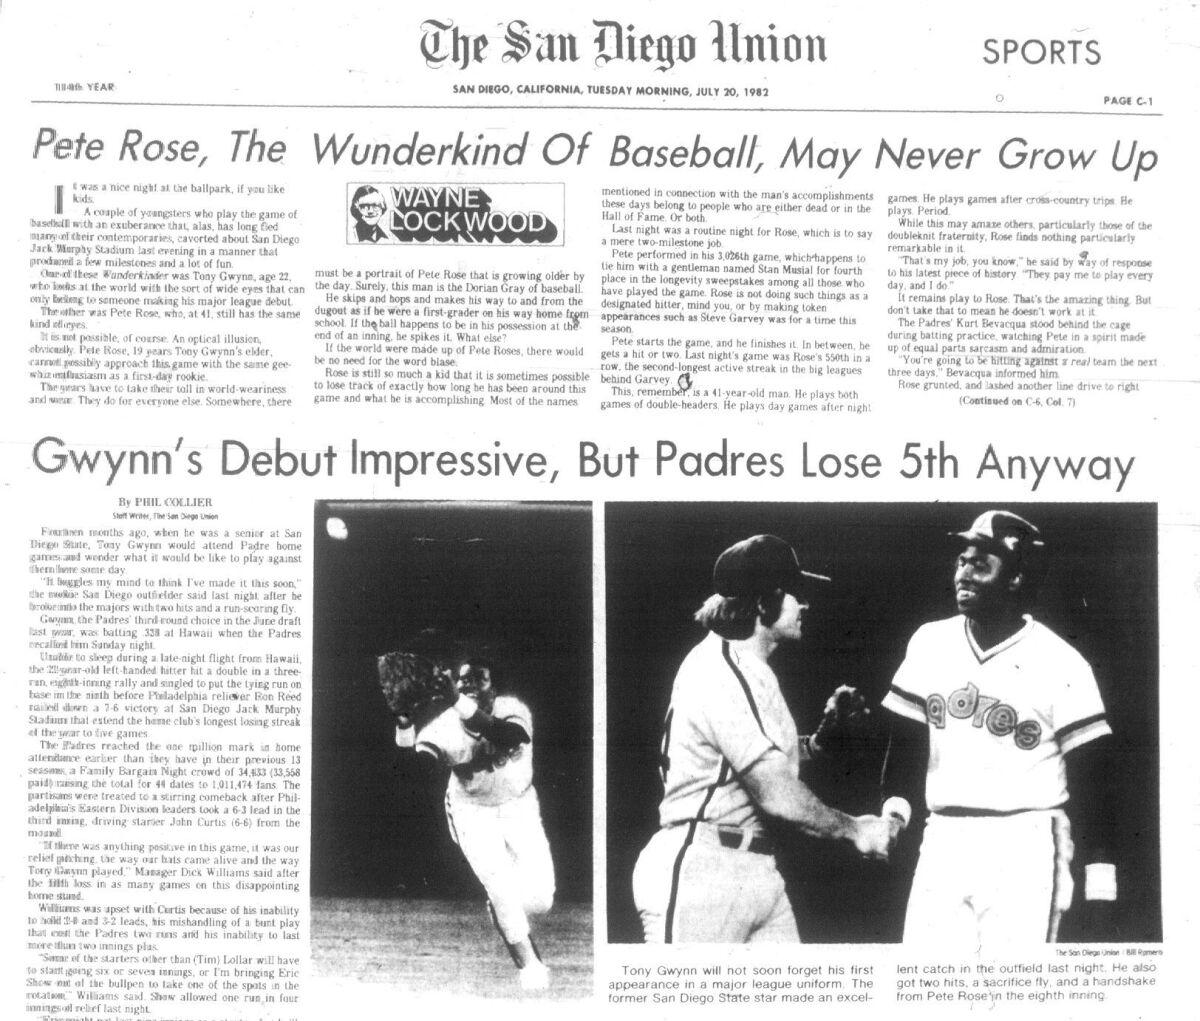 Front page of the Sports section of the San Diego Union tells the story of Tony Gwynn's debut in July 1982.